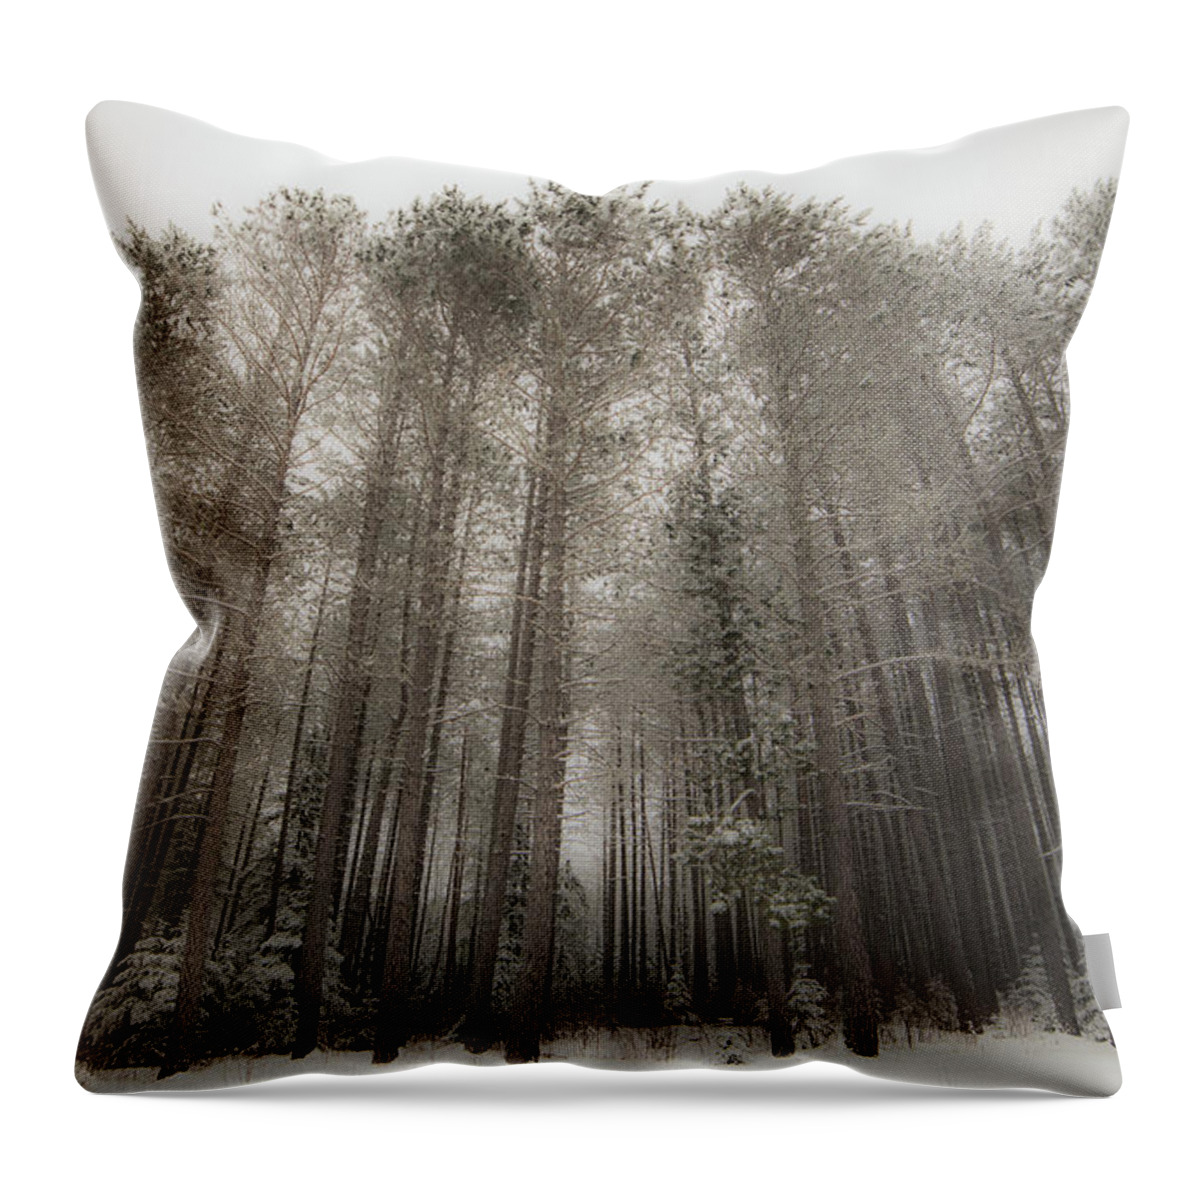 Superior National Forest Throw Pillow featuring the photograph Superior National Forest by Joe Kopp